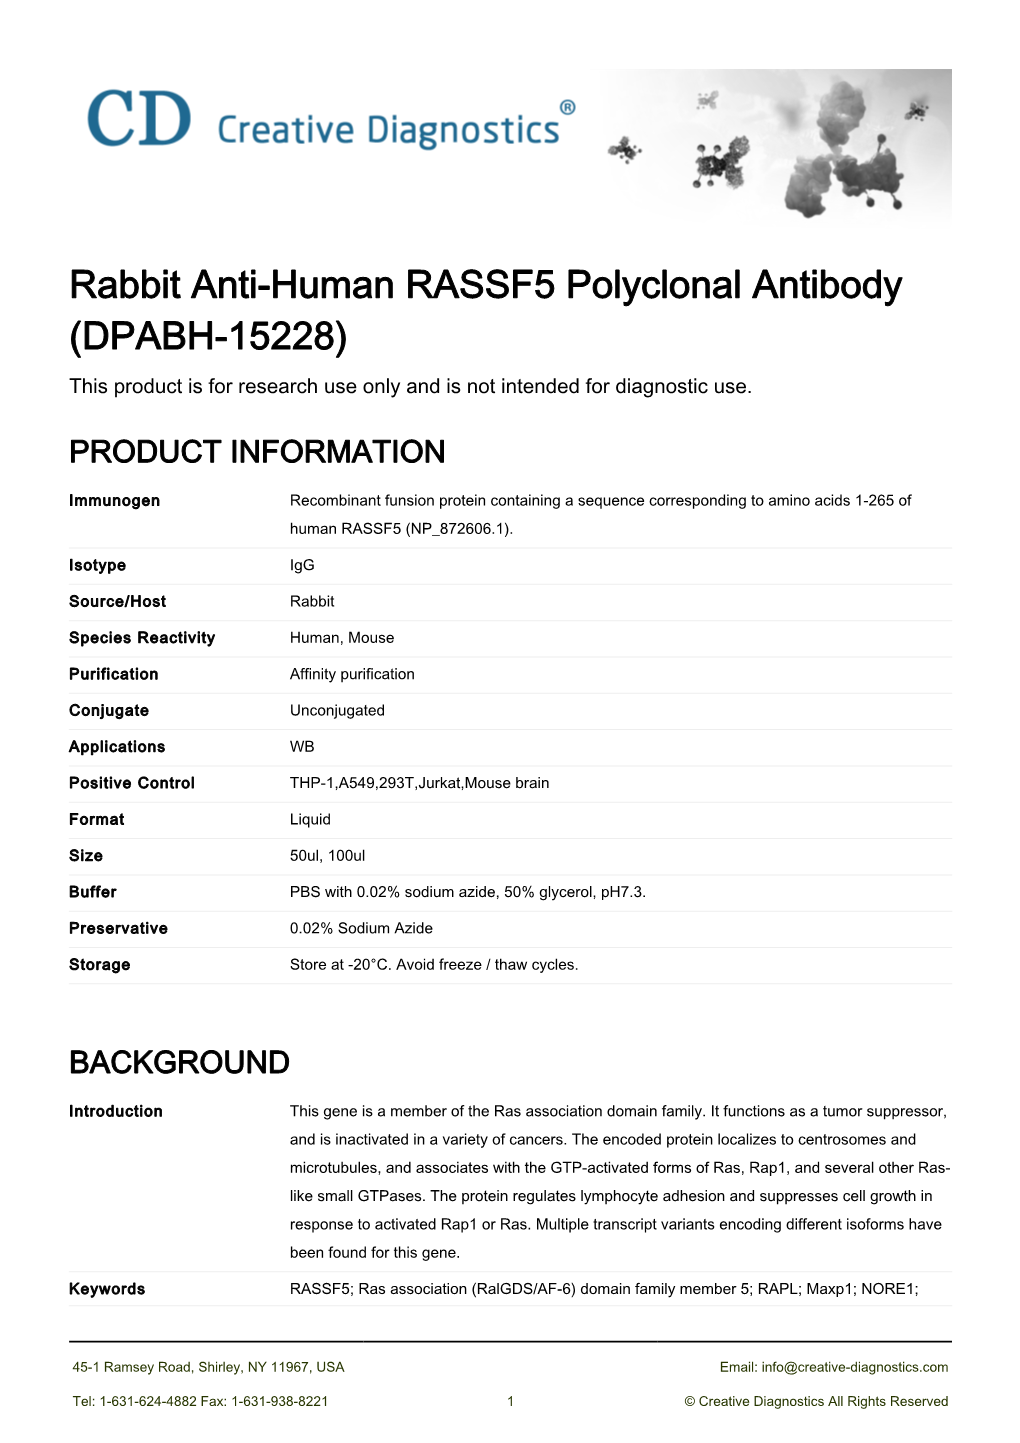 Rabbit Anti-Human RASSF5 Polyclonal Antibody (DPABH-15228) This Product Is for Research Use Only and Is Not Intended for Diagnostic Use